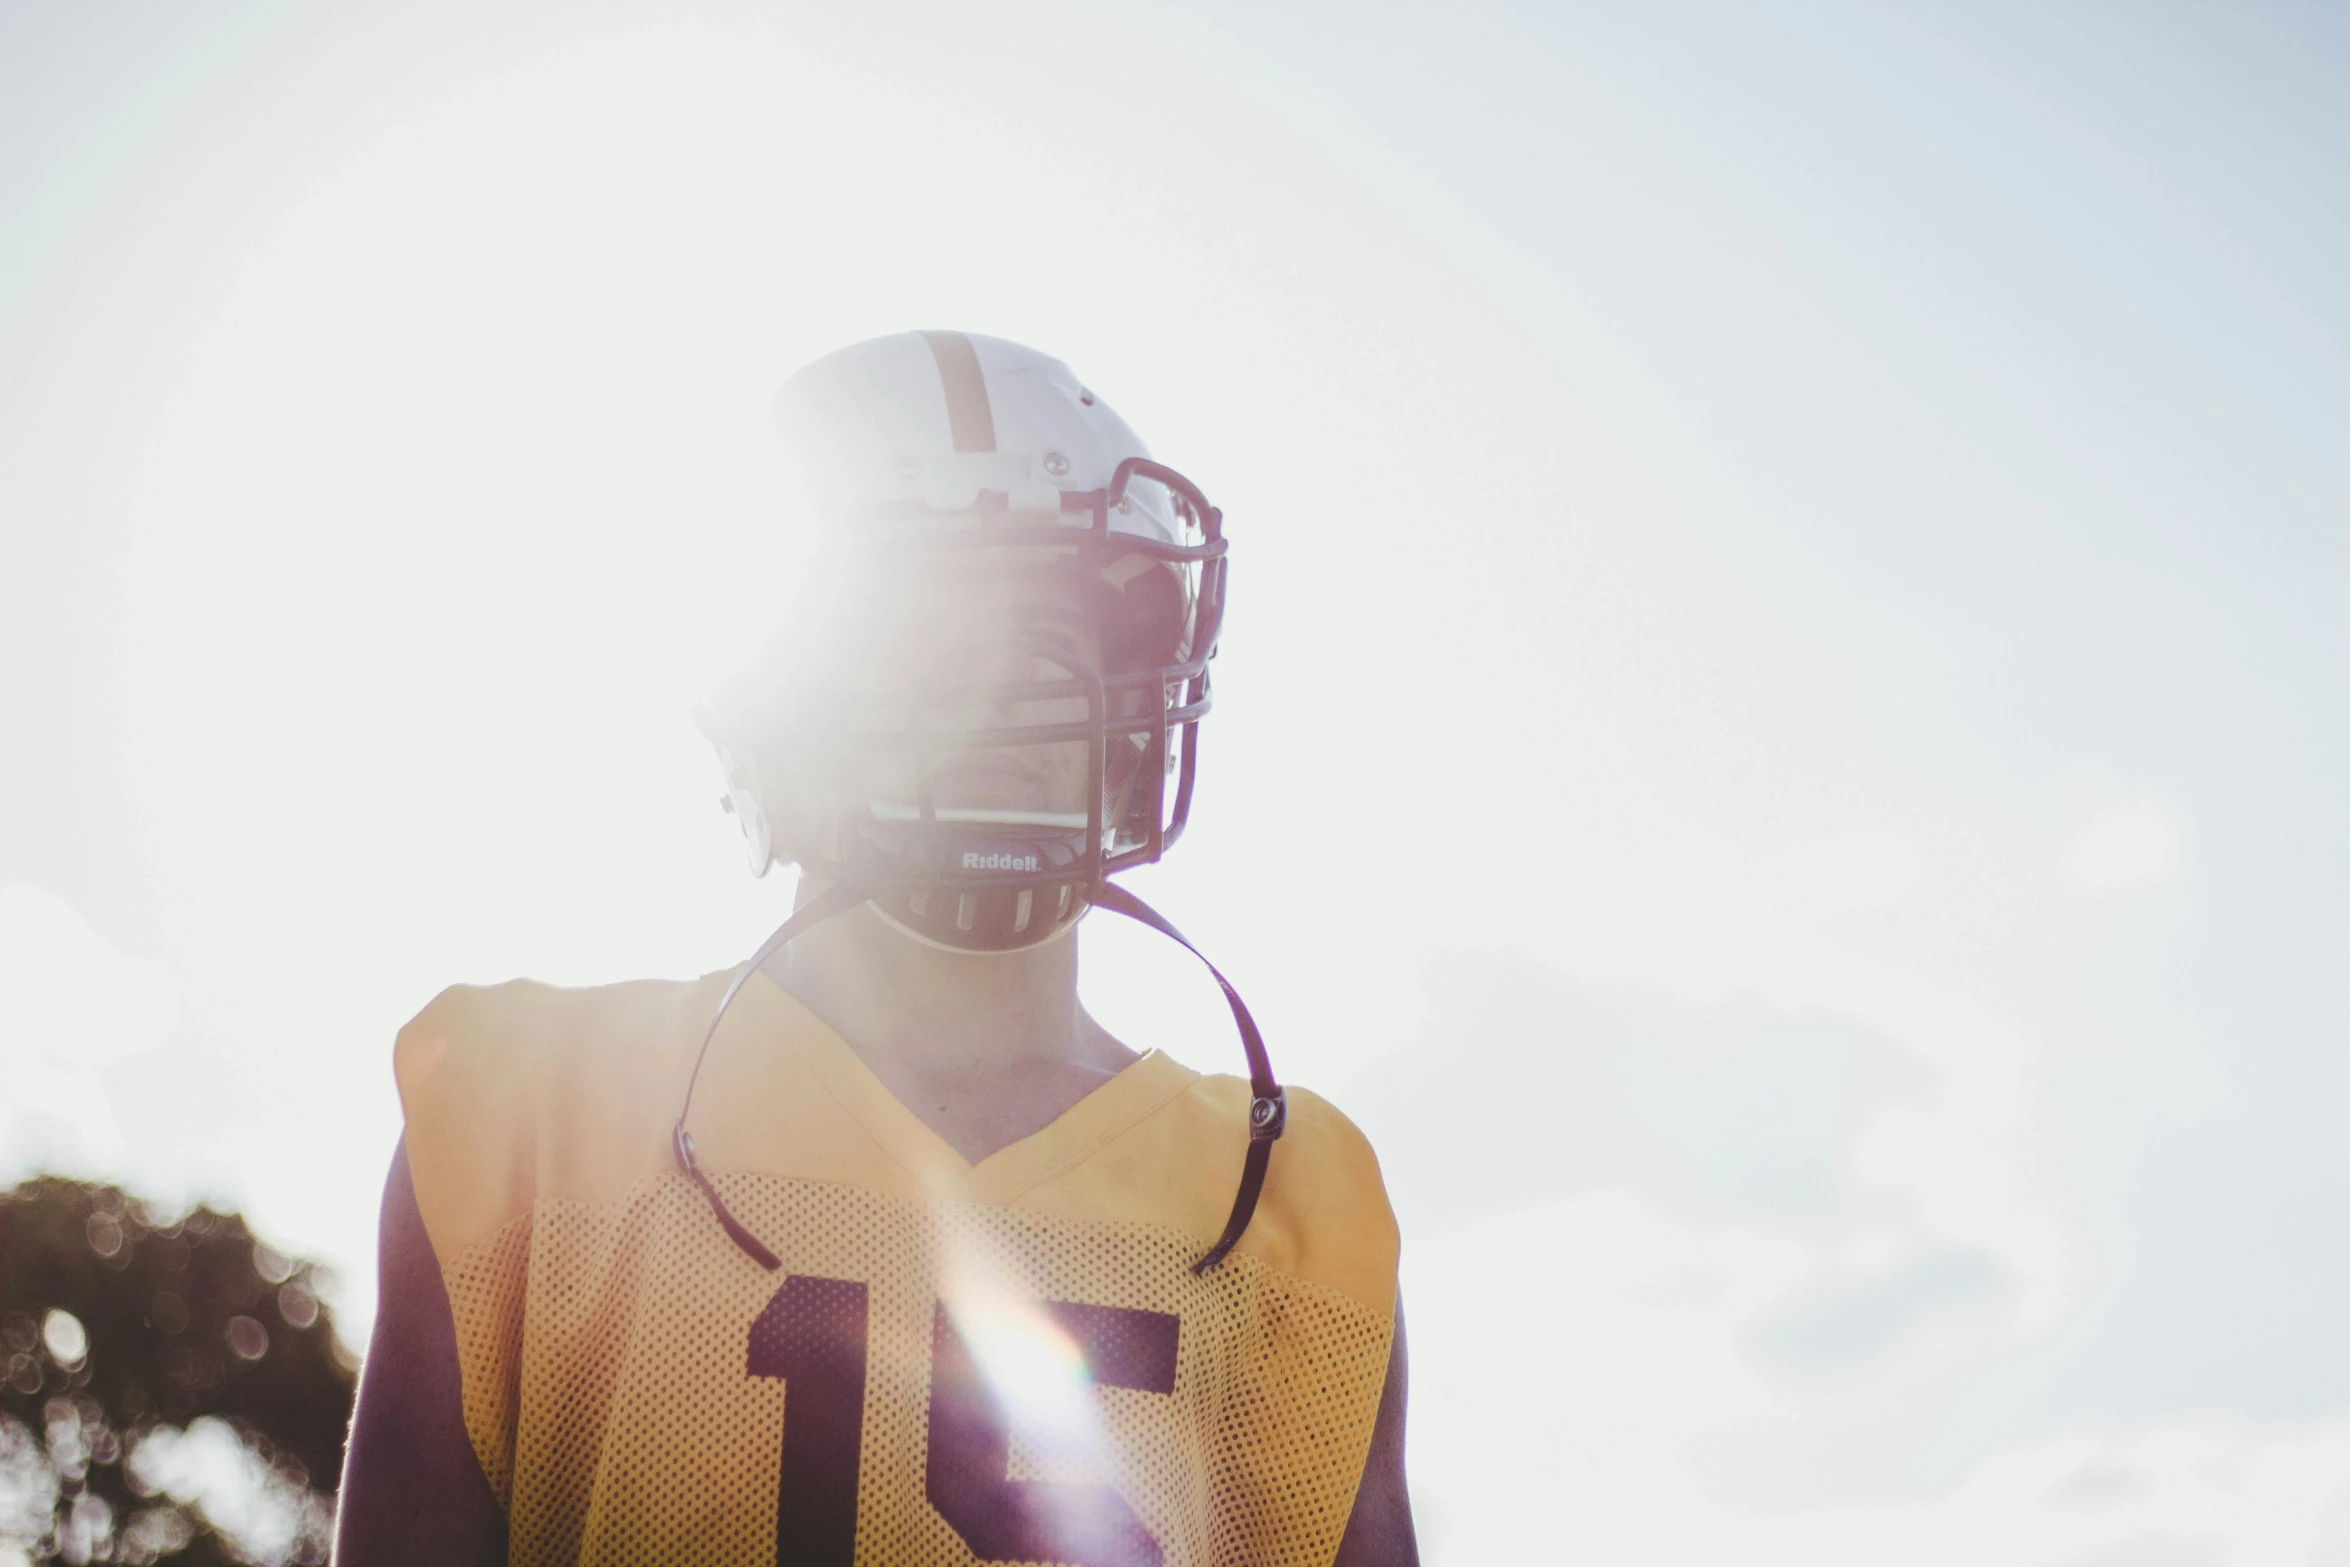 a football player stands on a sunny day